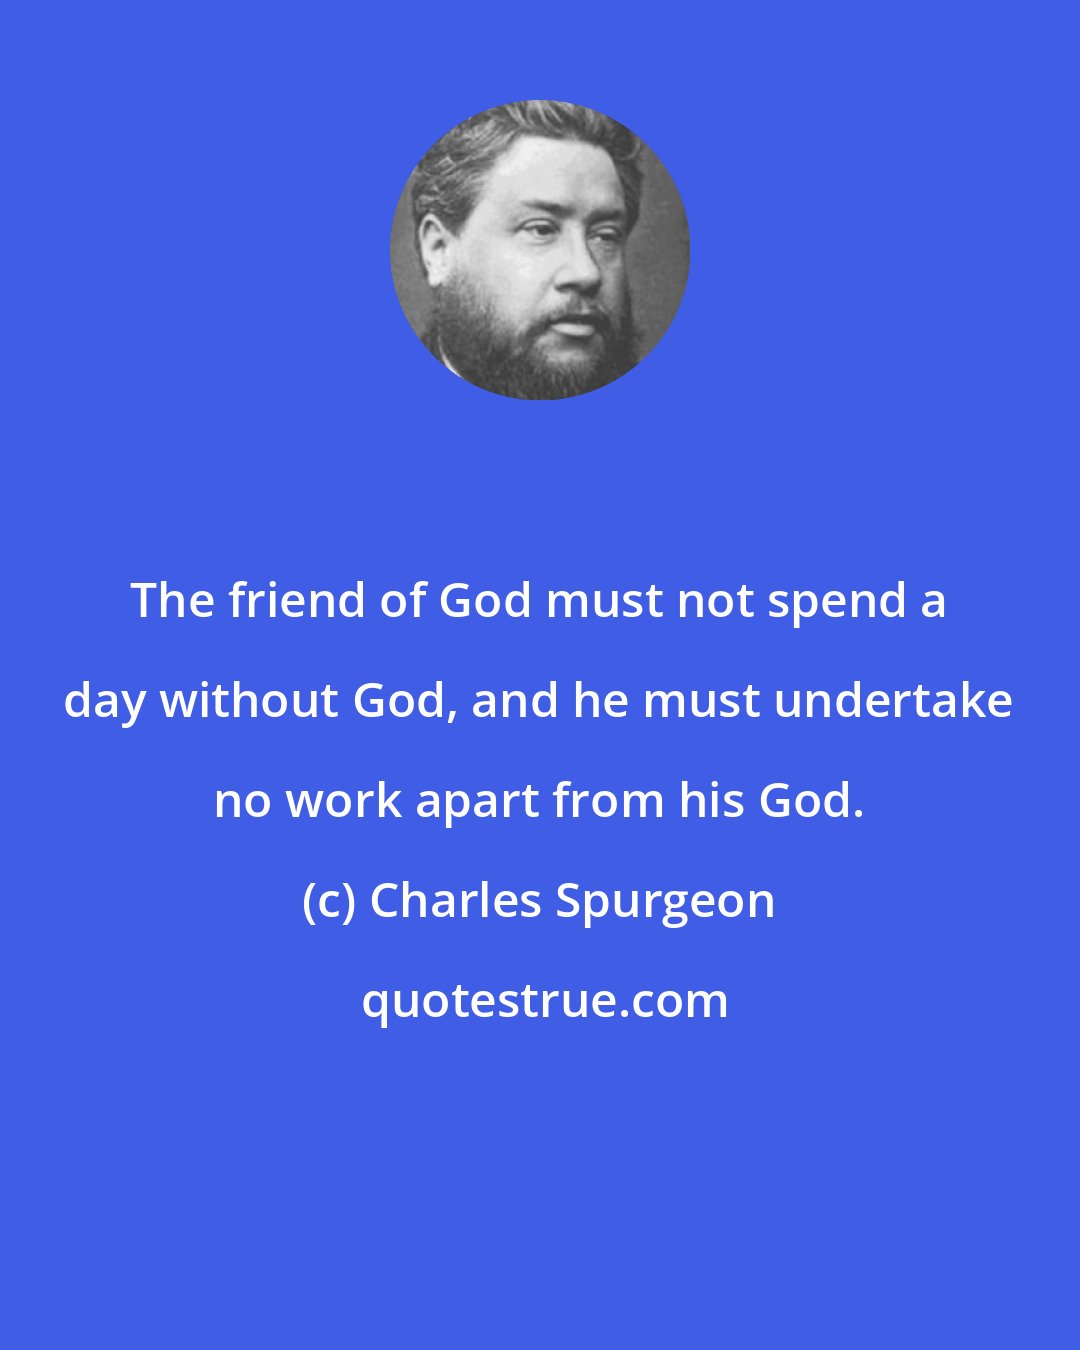 Charles Spurgeon: The friend of God must not spend a day without God, and he must undertake no work apart from his God.